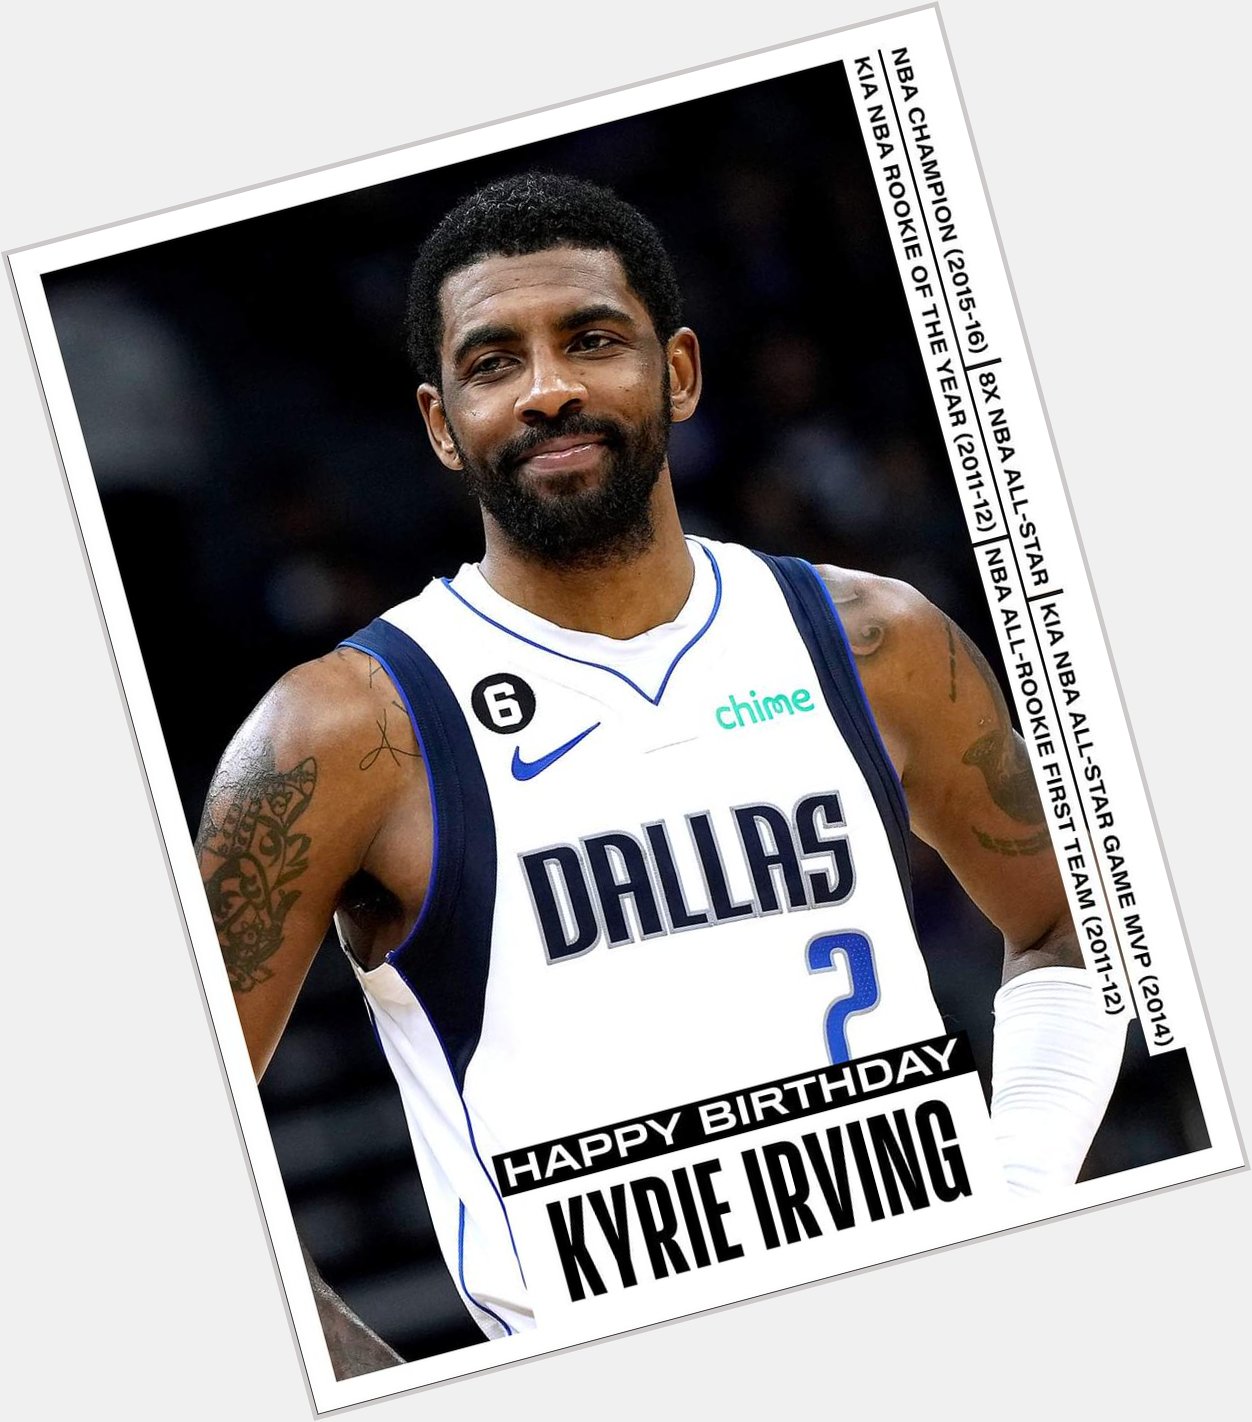 Join us in wishing Kyrie Irving of the Mavericks a HAPPY 31st BIRTHDAY!    